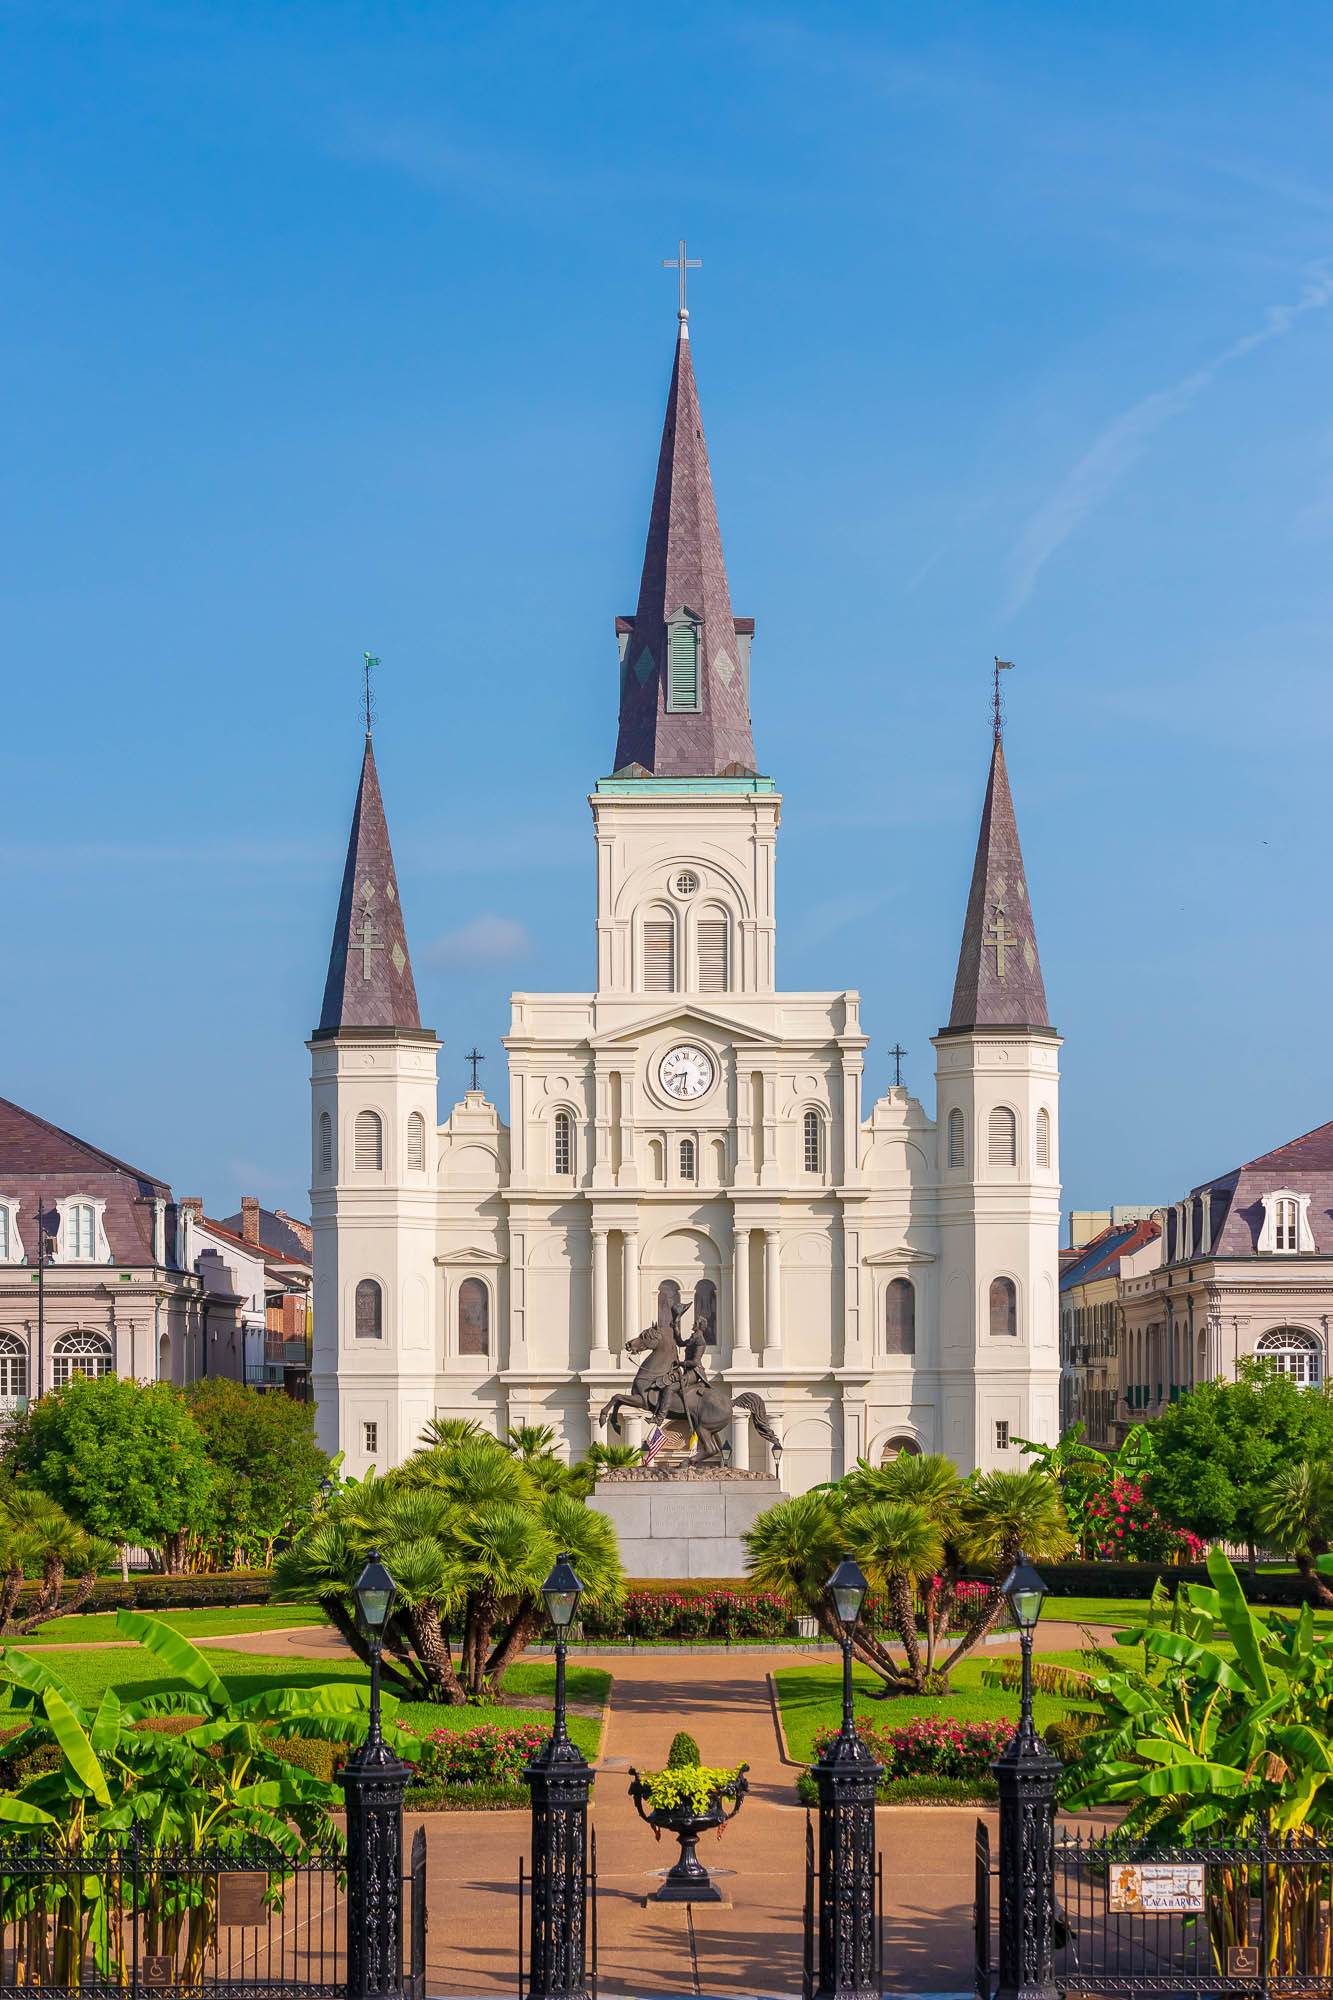 St. Louis Cathedral in French Quarter/Warehouse District in New Orleans